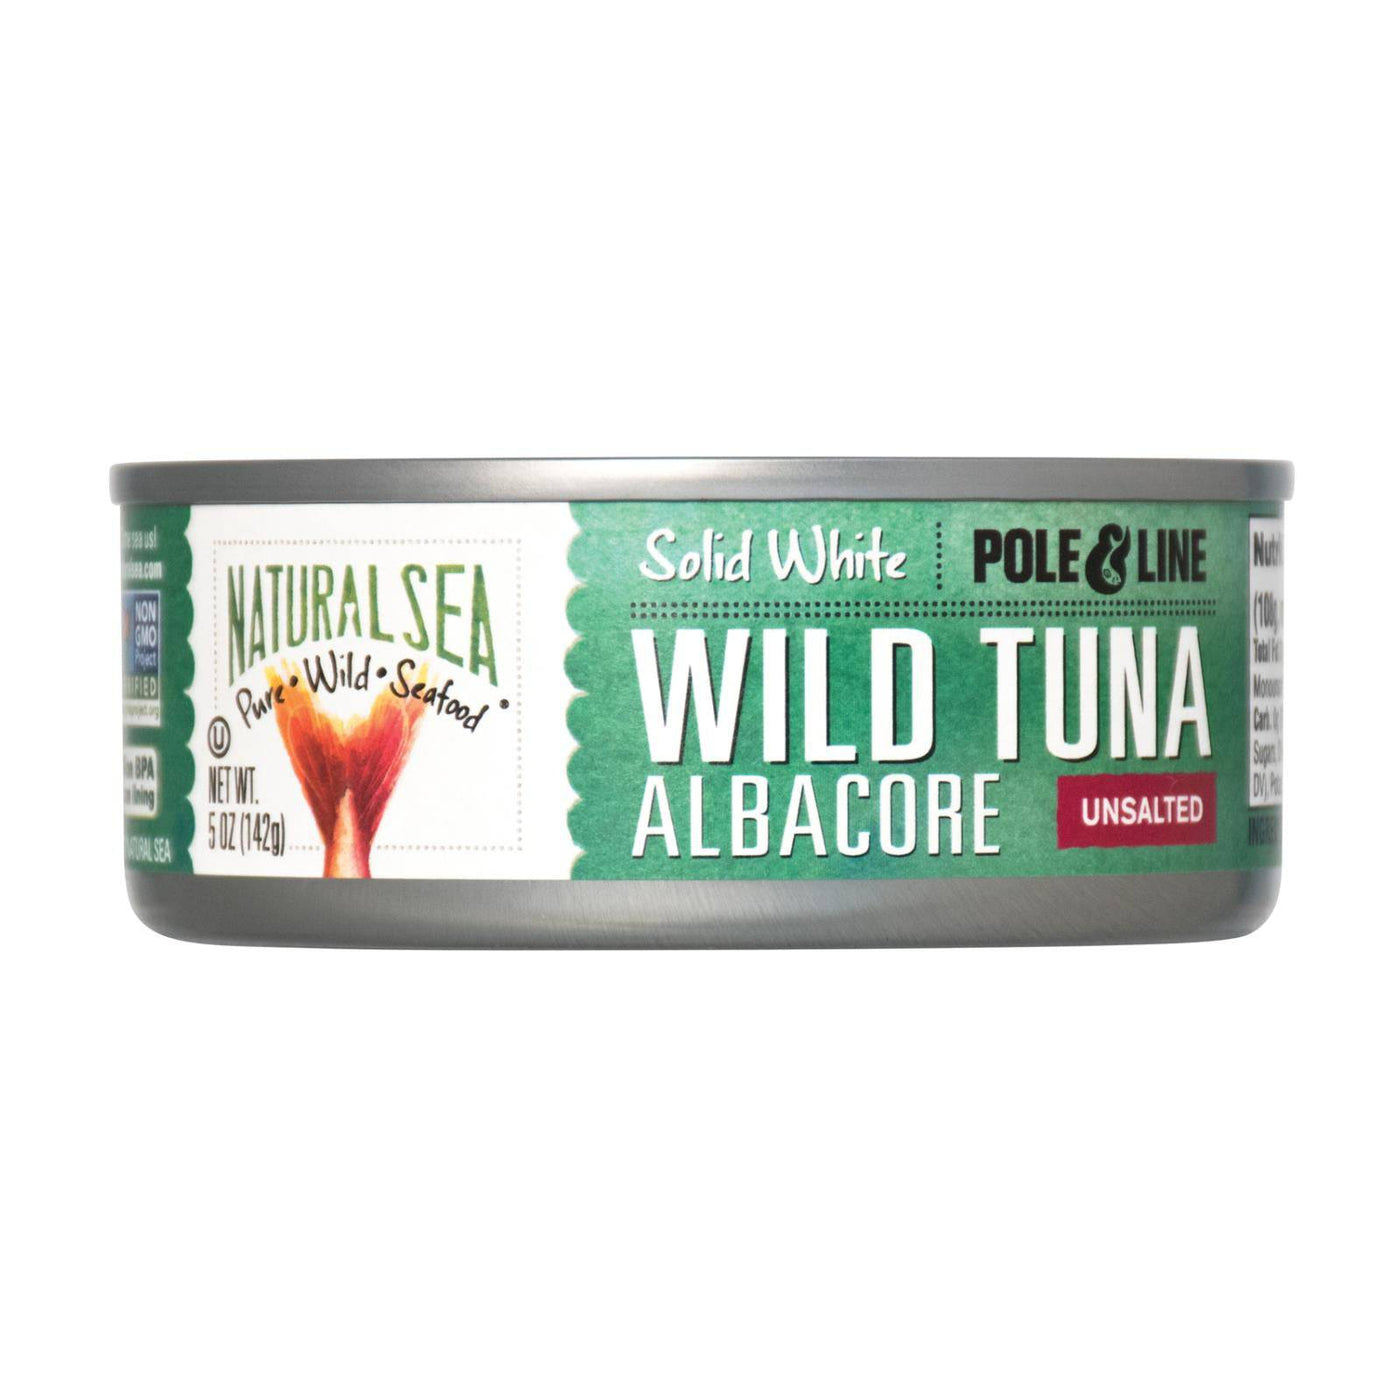 Natural Sea Wild Albacore Tuna, Unsalted, Solid White - Case Of 12 - 5 Oz | OnlyNaturals.us